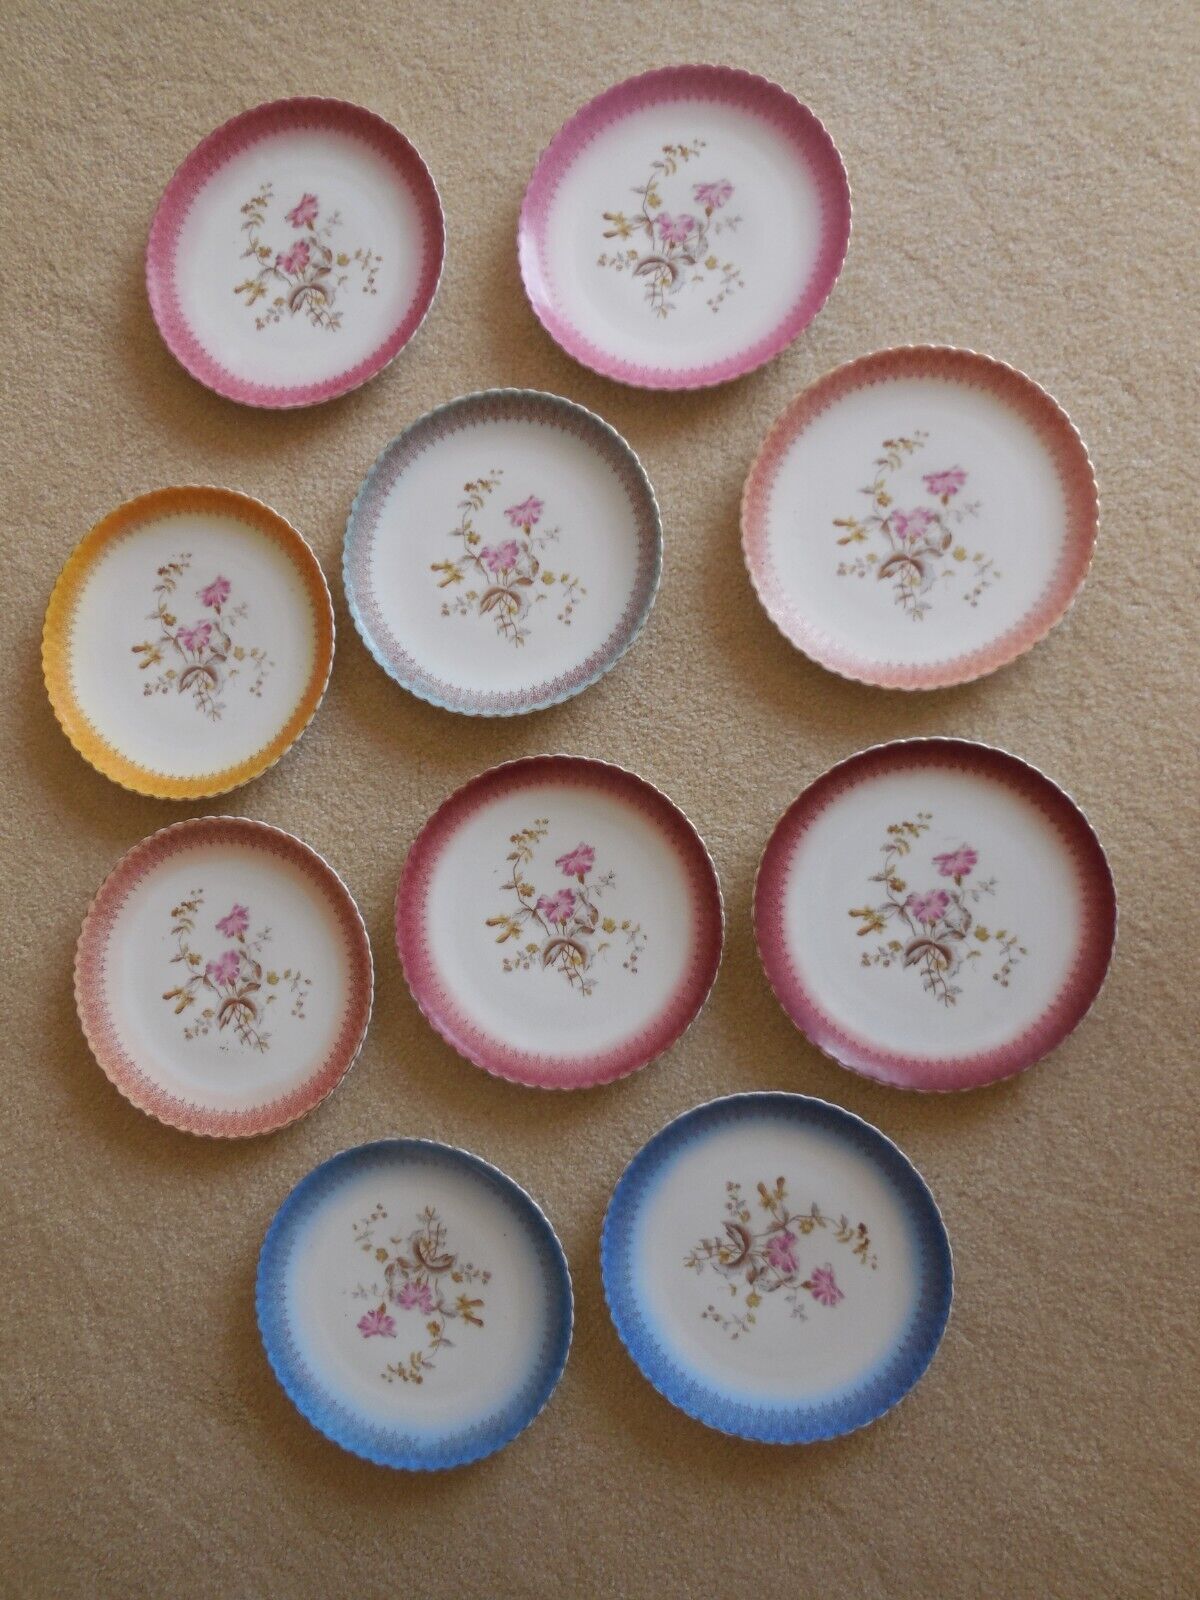 Antique Marx and Gutherz Carlsbad set of 10 gold trim floral plates